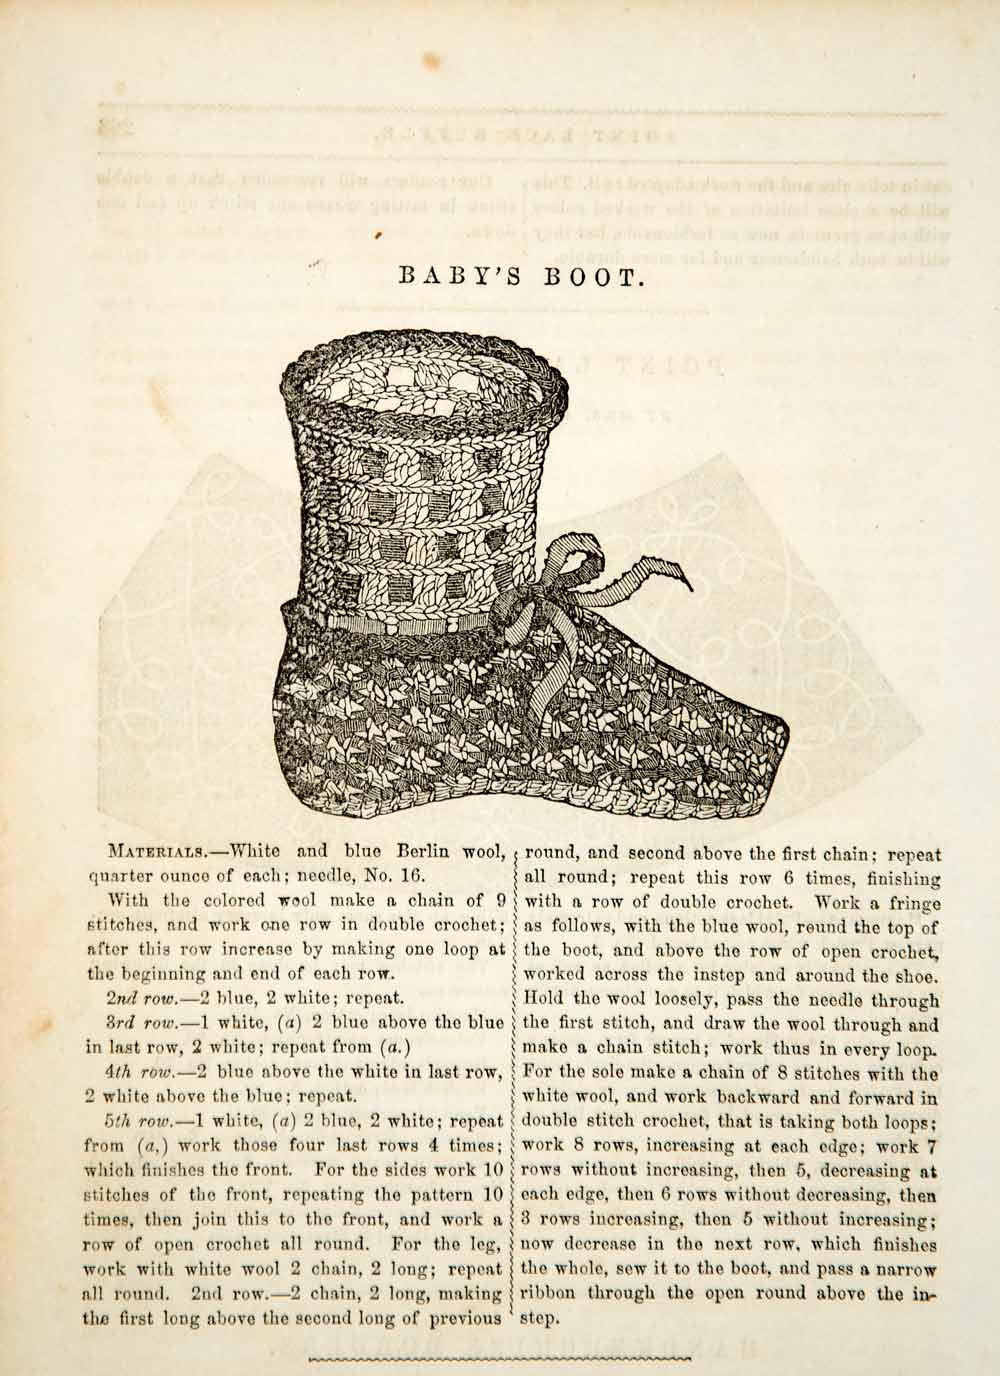 1856 Article Victorian Baby Bootie Crocheted Crocheted Instructions Fashion YPM2